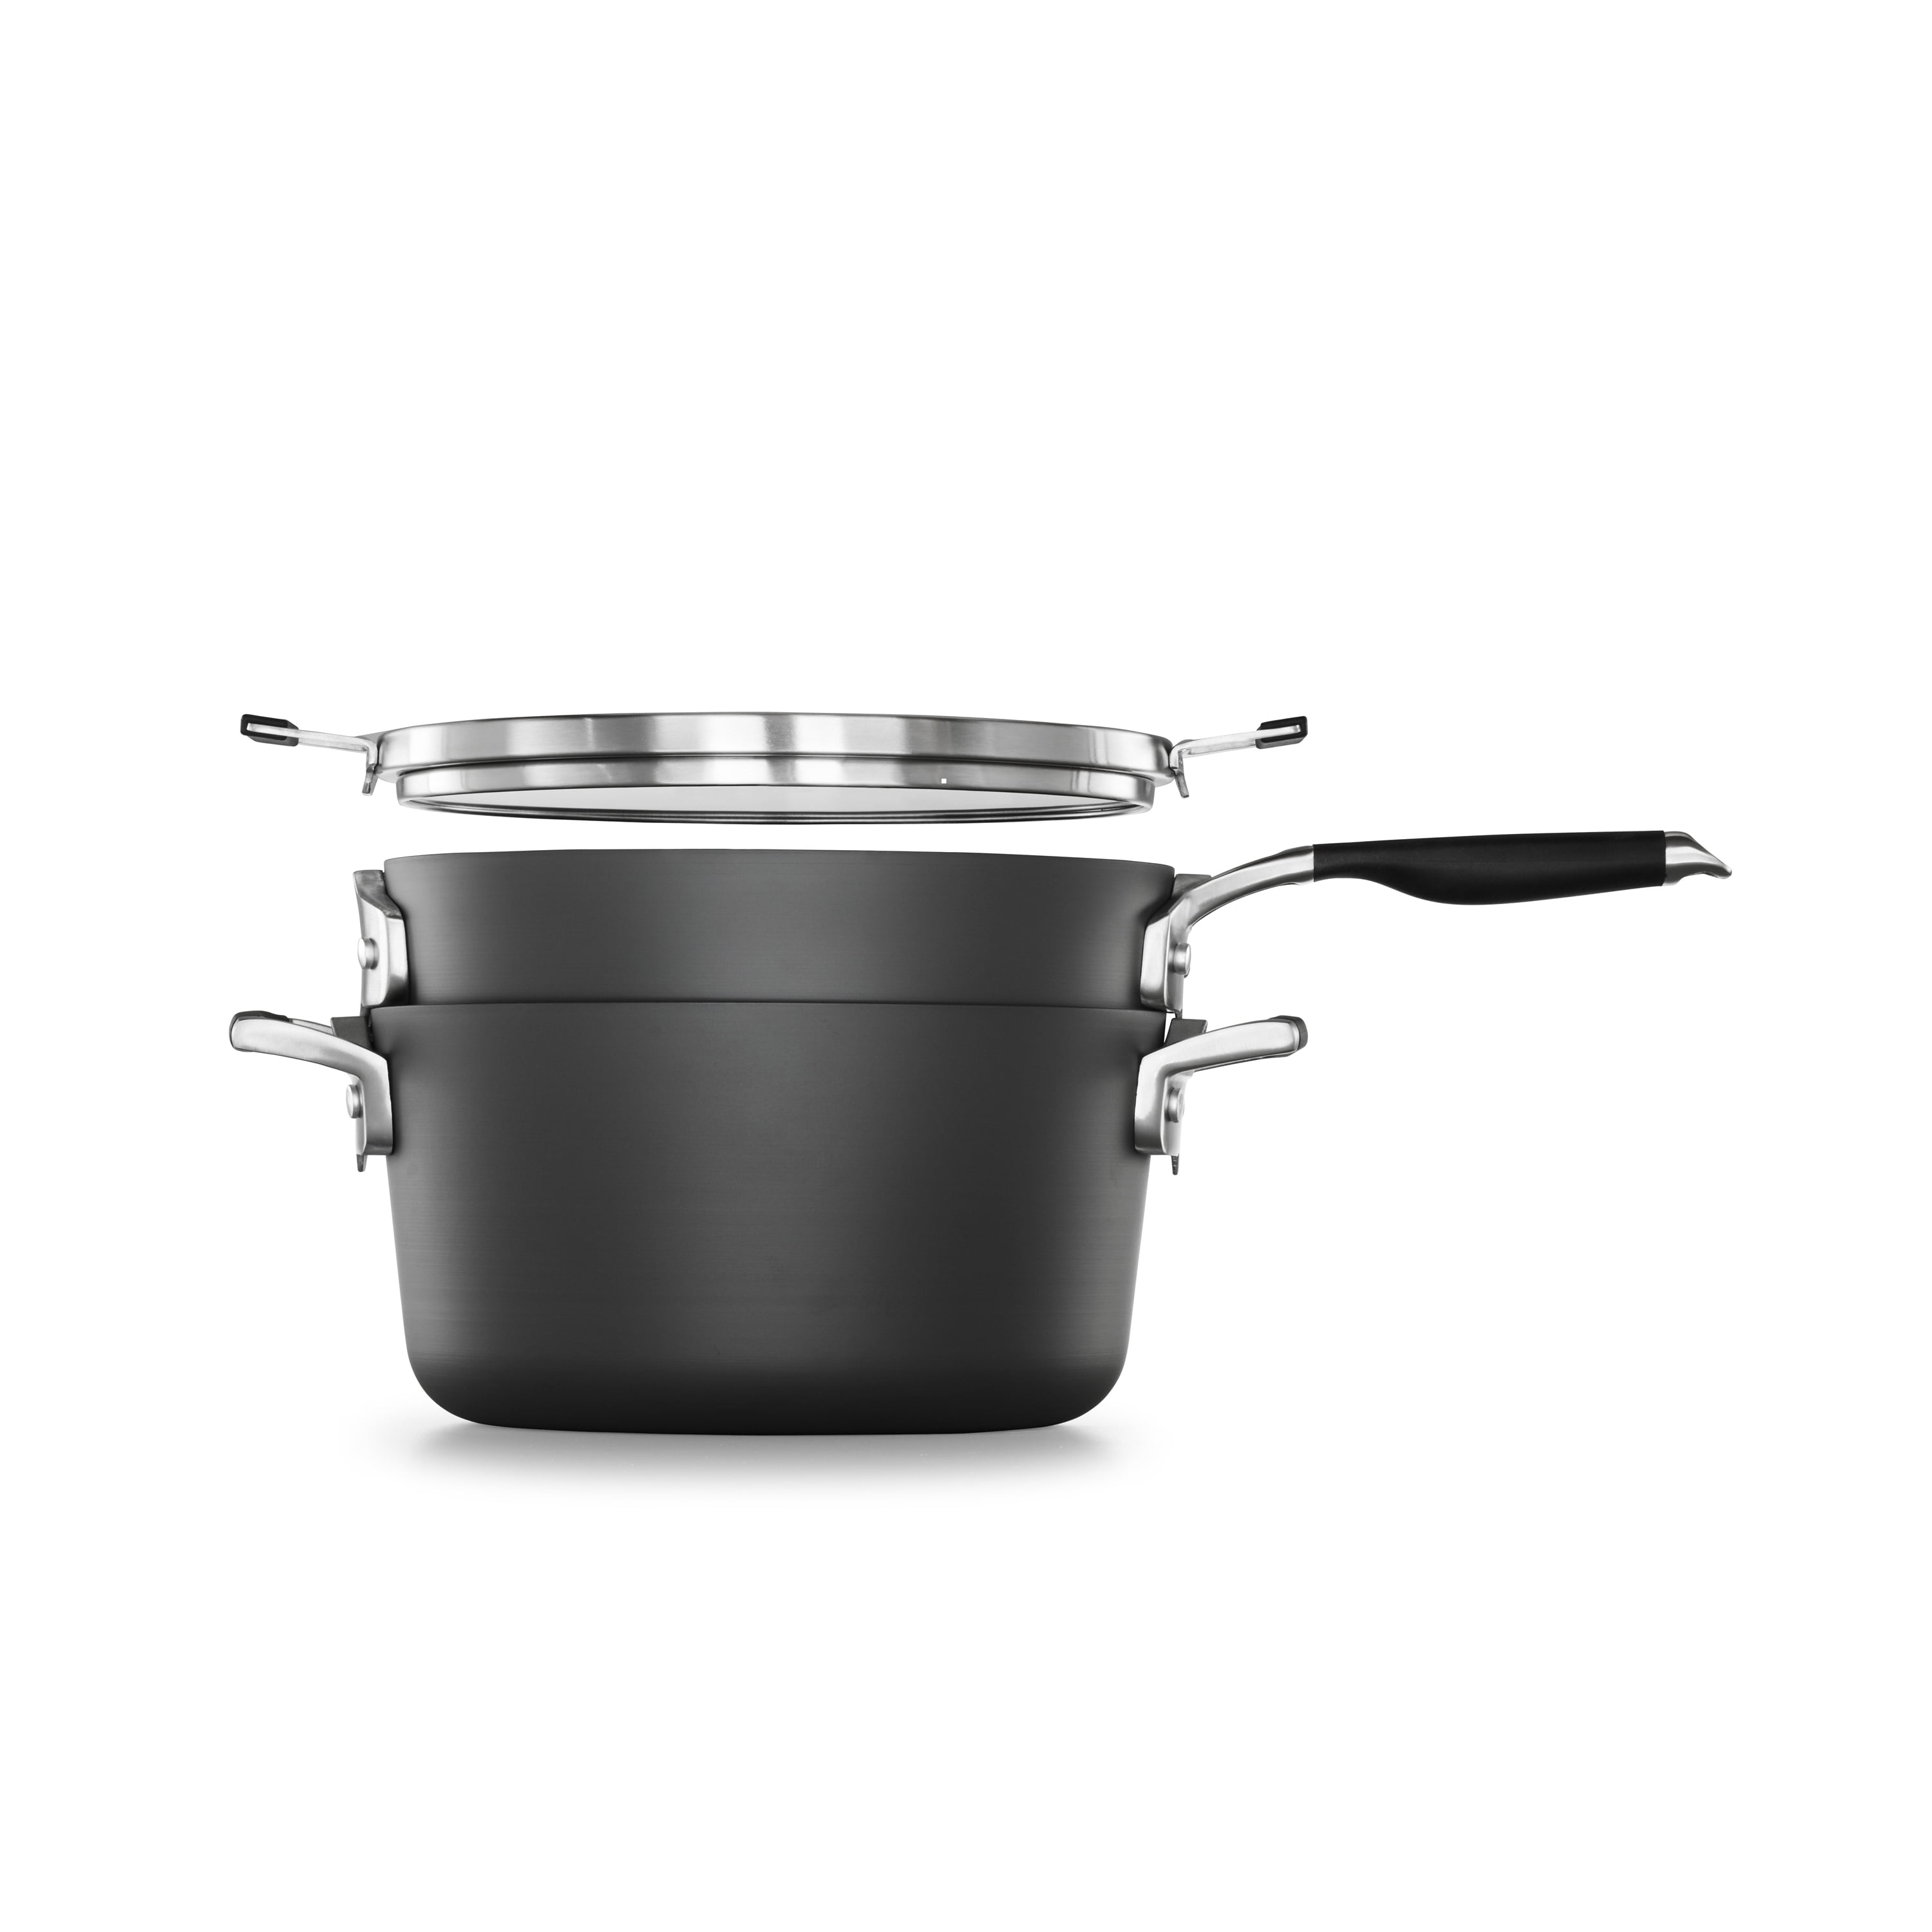 Select by Calphalon with AquaShield Nonstick 9pc Space-Saving Cookware Set  in 2023